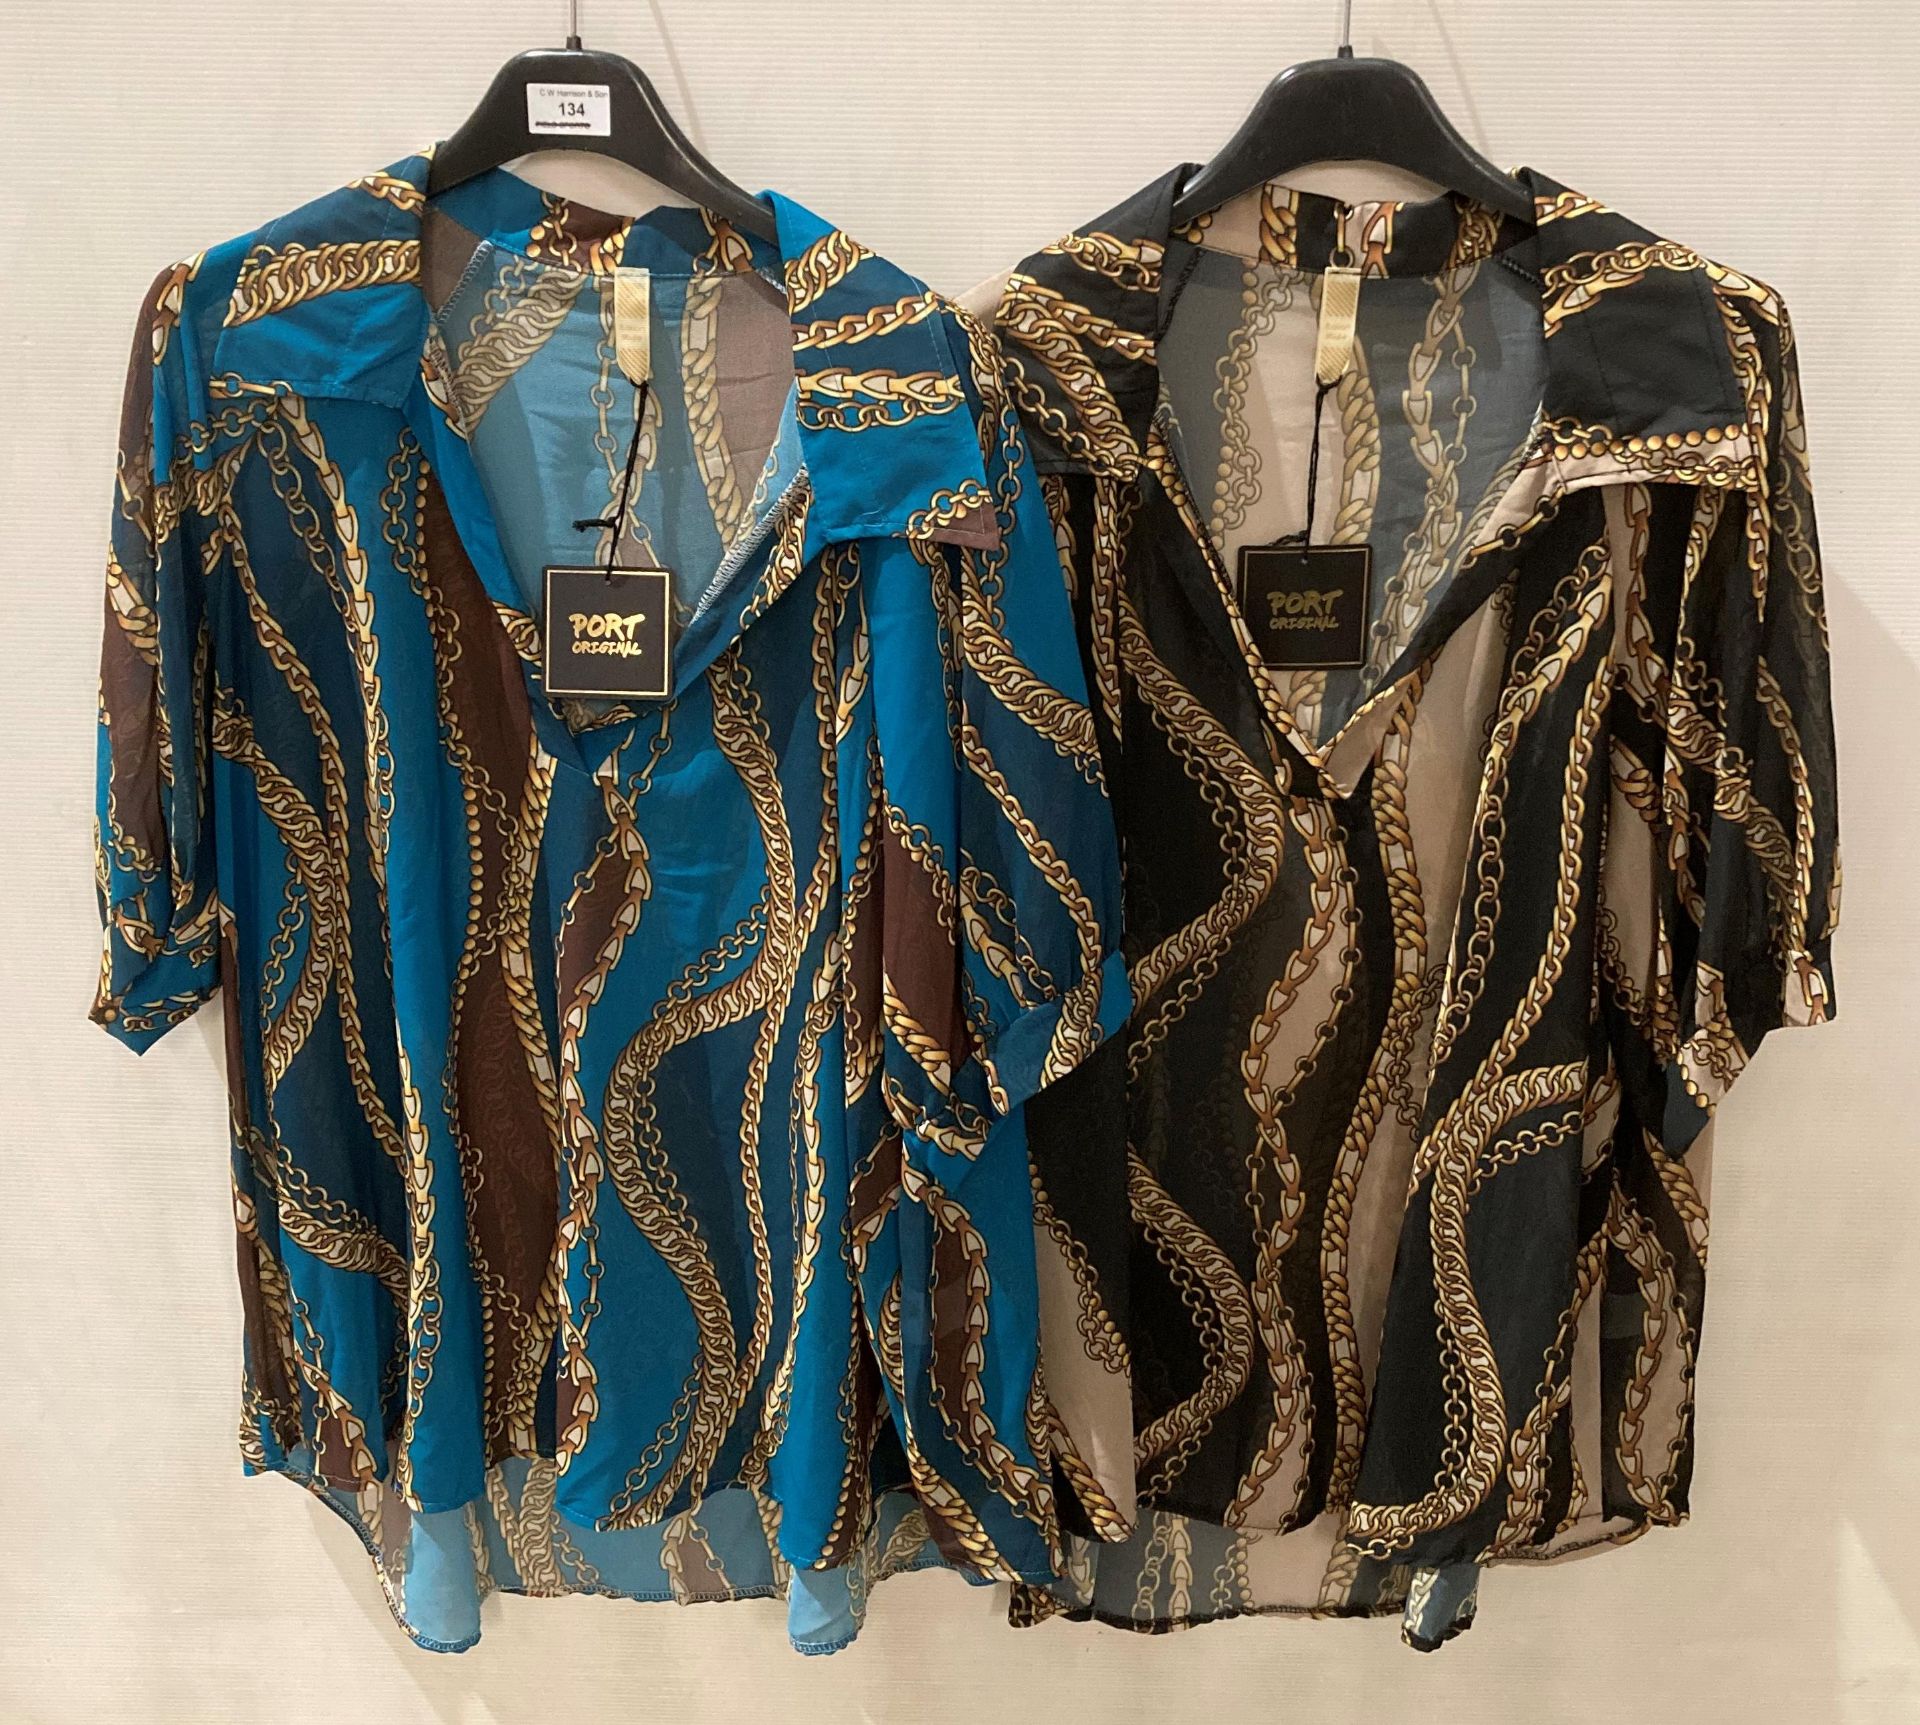 14 x Port Original Italian-style blouses with link chain design,